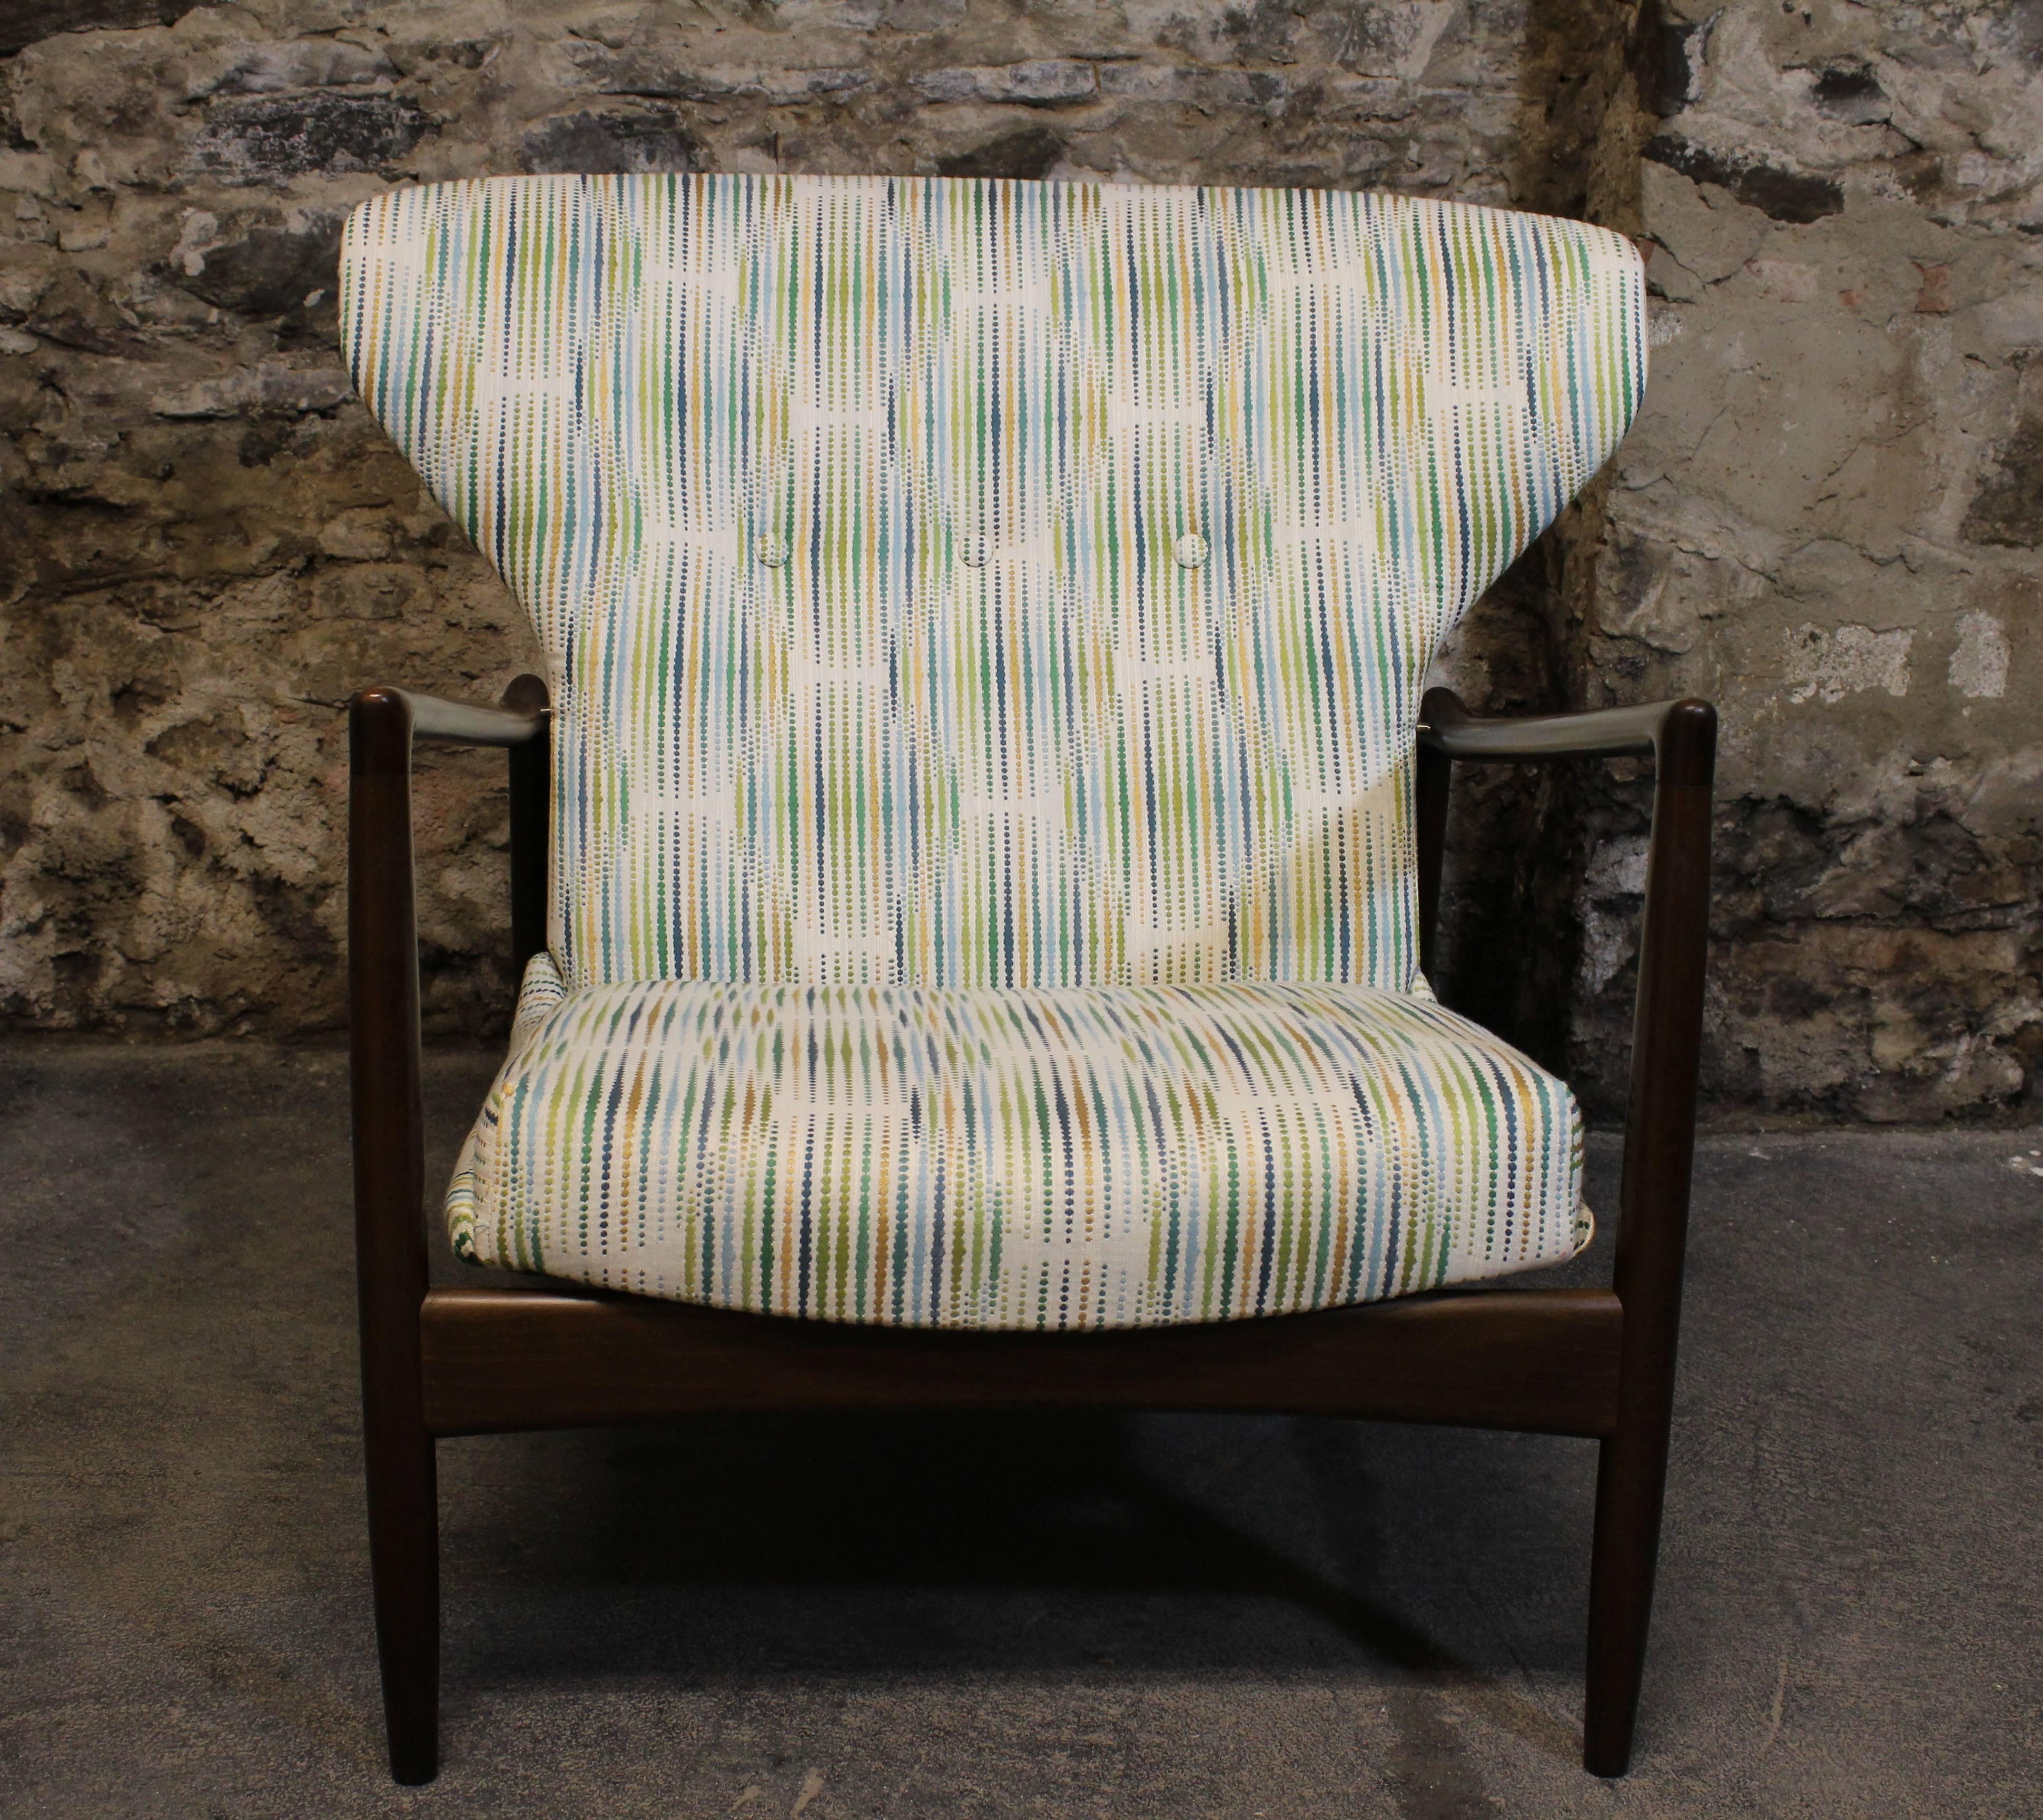 Style meets function with this Classic midcentury design by IB Kofod-Larsen. Reupholstered in a fun fabric this timeless lounge chair will look good where ever it is placed in a room.

Scandinavian Modern / Mid-Century Modern.